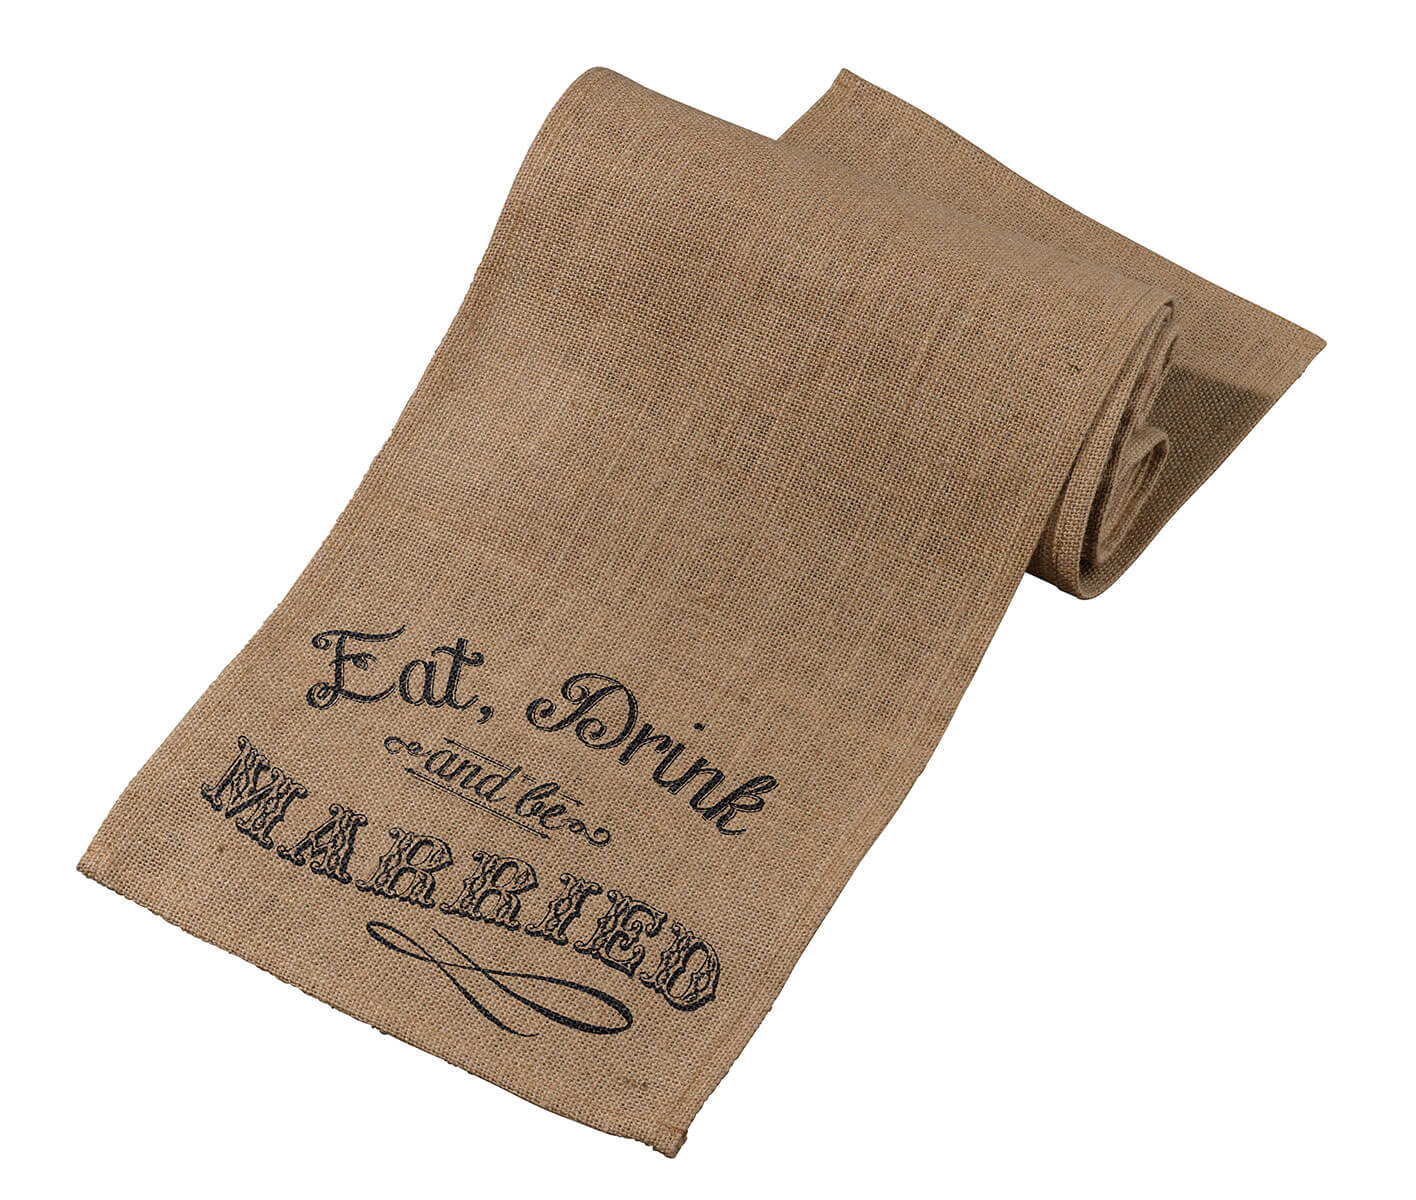 Eat, Drink and Be Married Rustic Burlap Table Runner